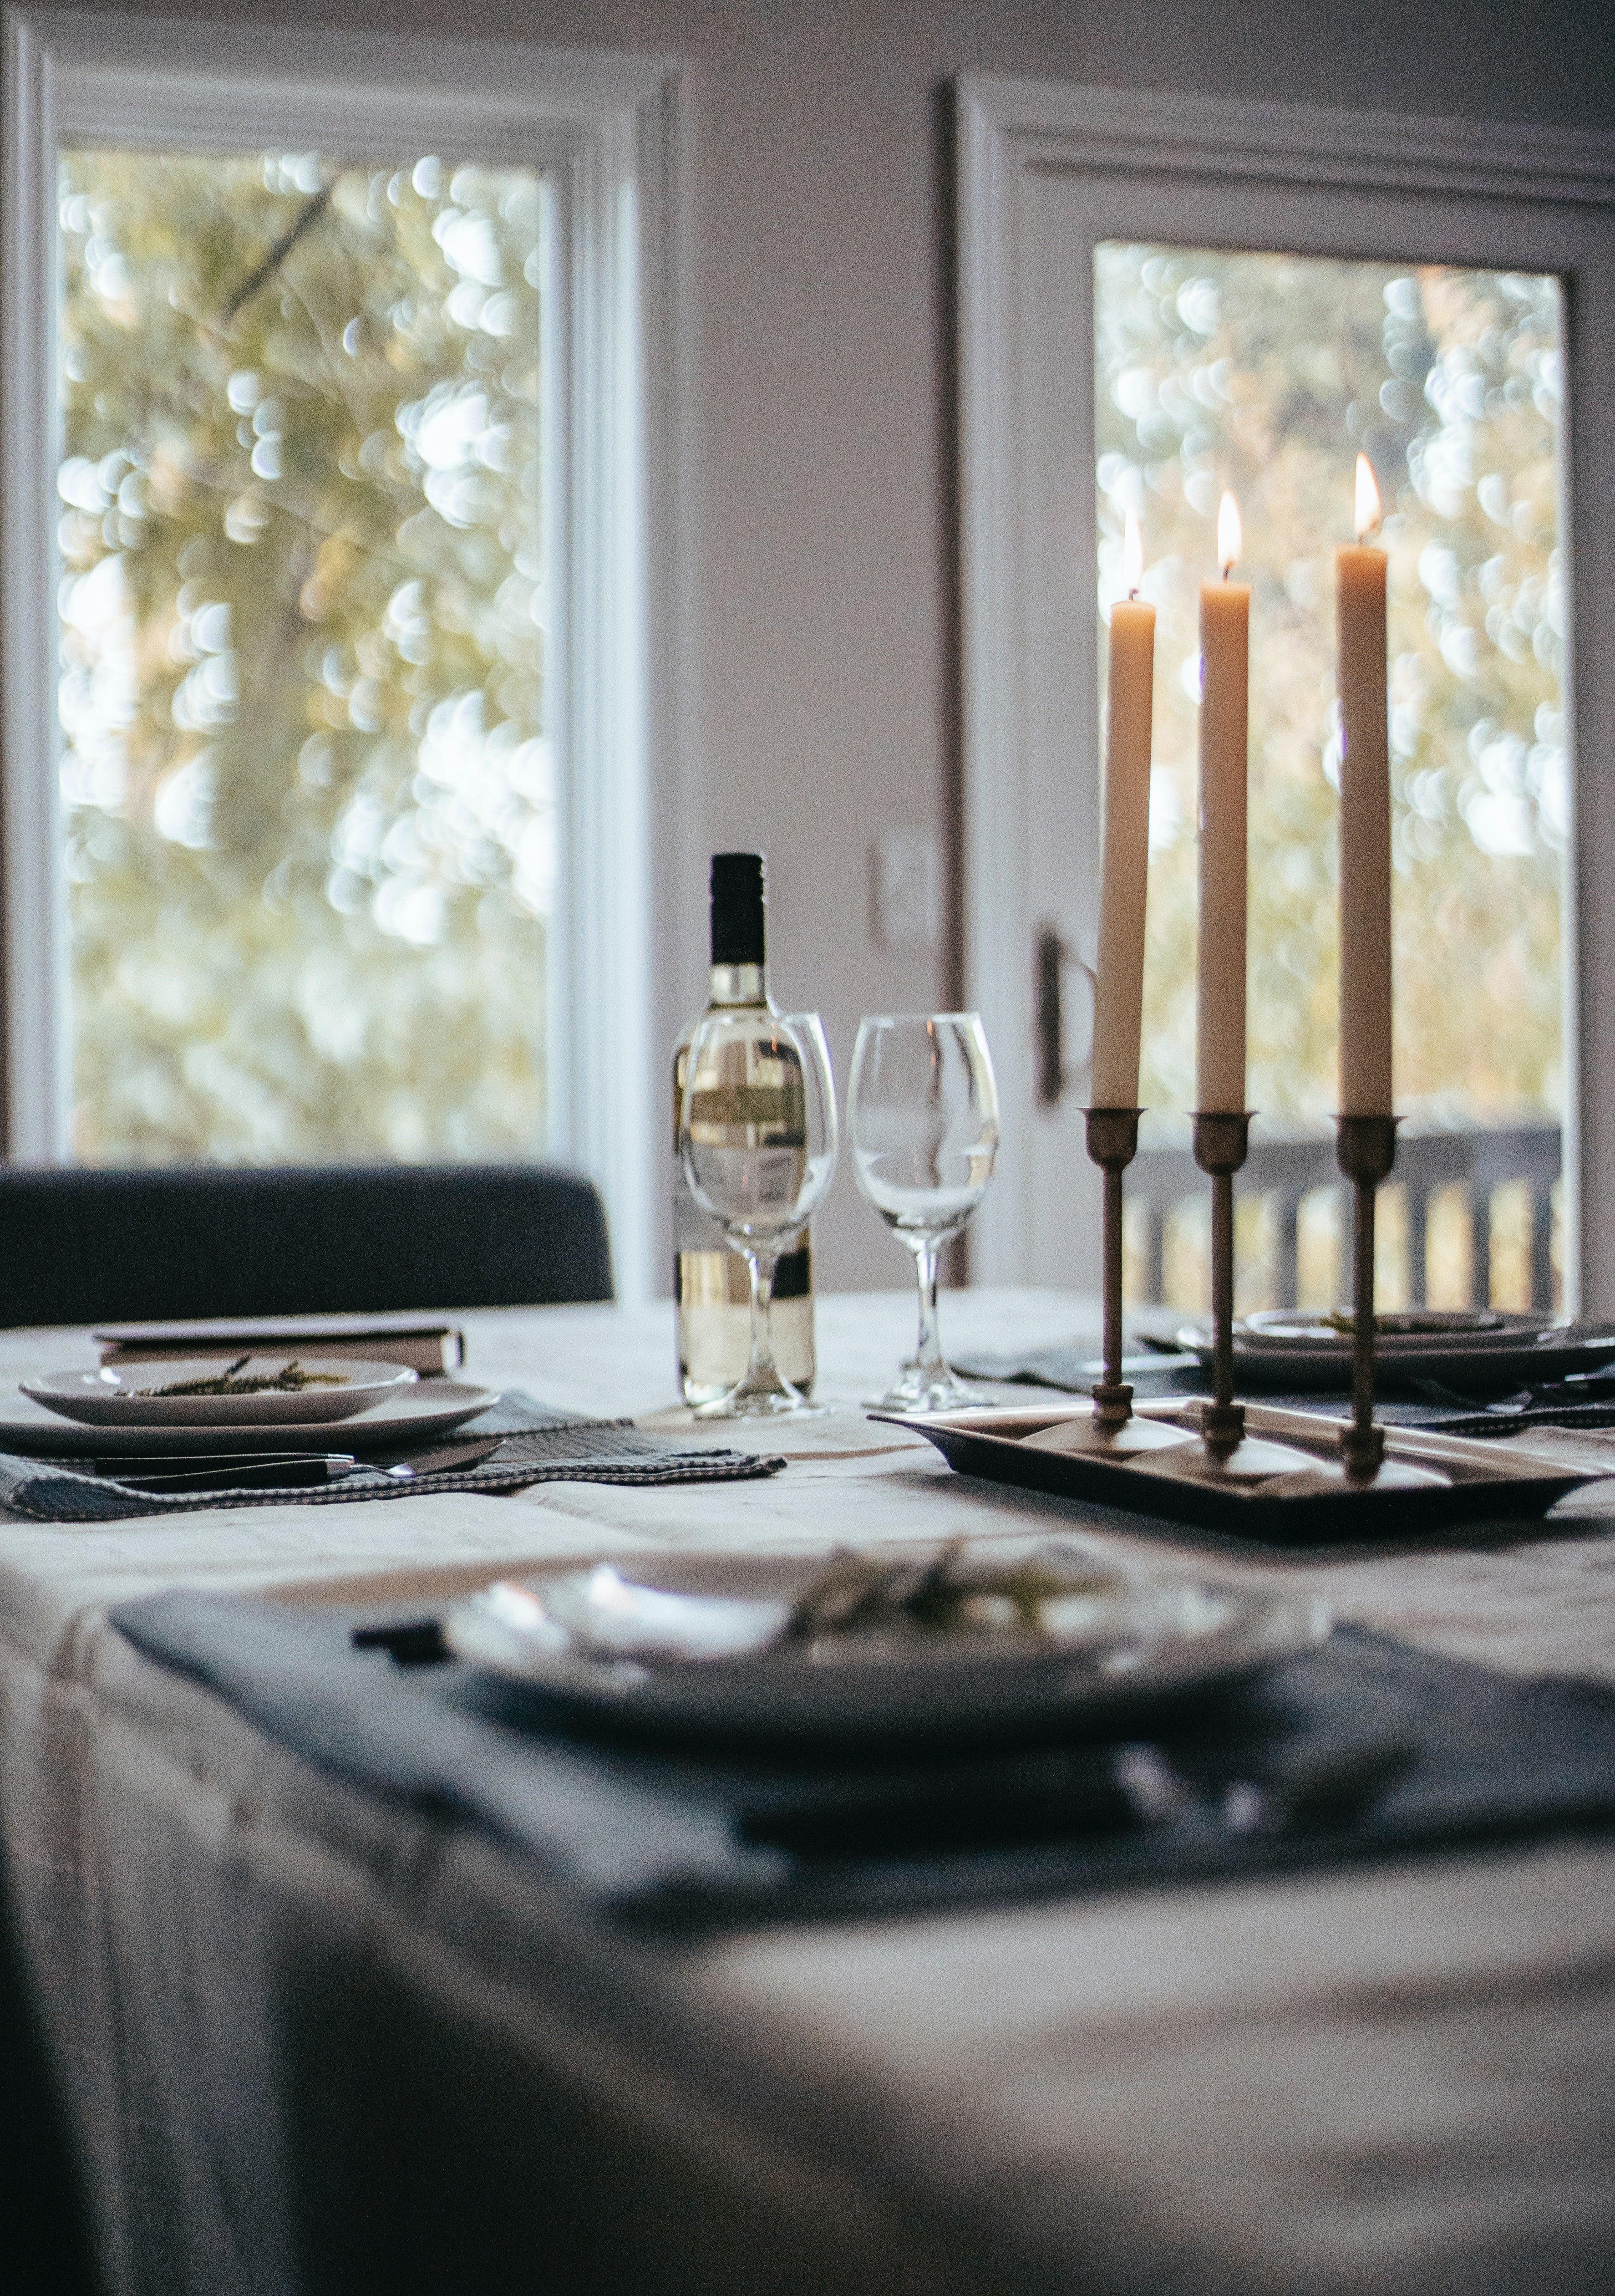 Amelia scheduled a reservation at an exquisite restaurant for a dinner on their wedding anniversary eve  | Source: Pexels